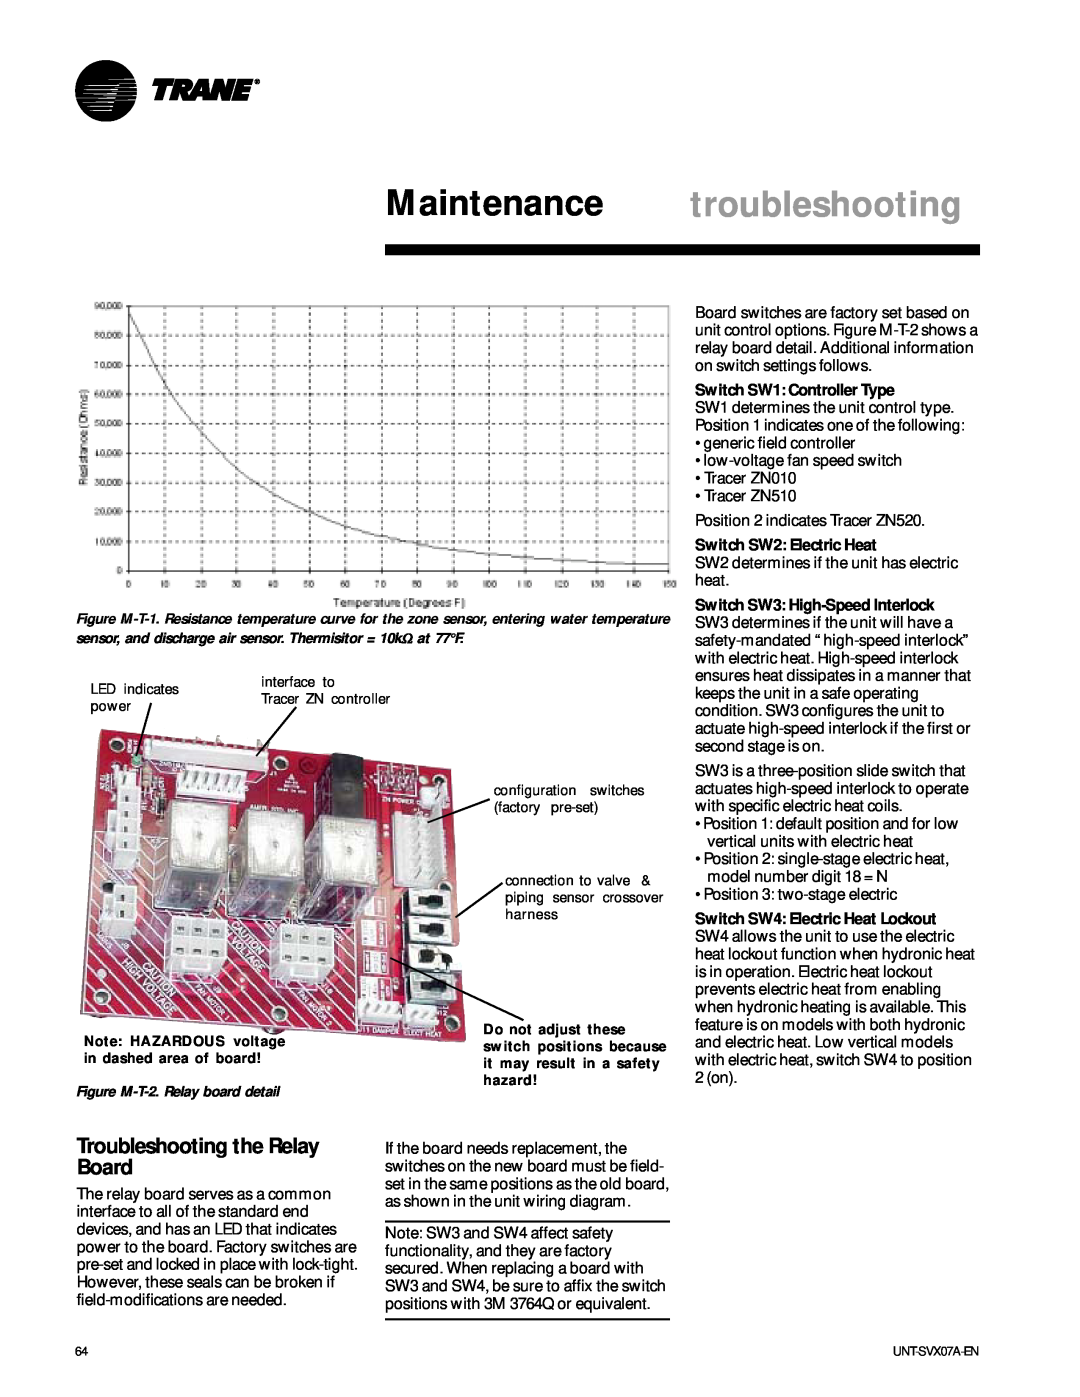 Trane UNT-SVX07A-EN manual Maintenance troubleshooting, Troubleshooting the Relay Board, Switch SW1 Controller Type 